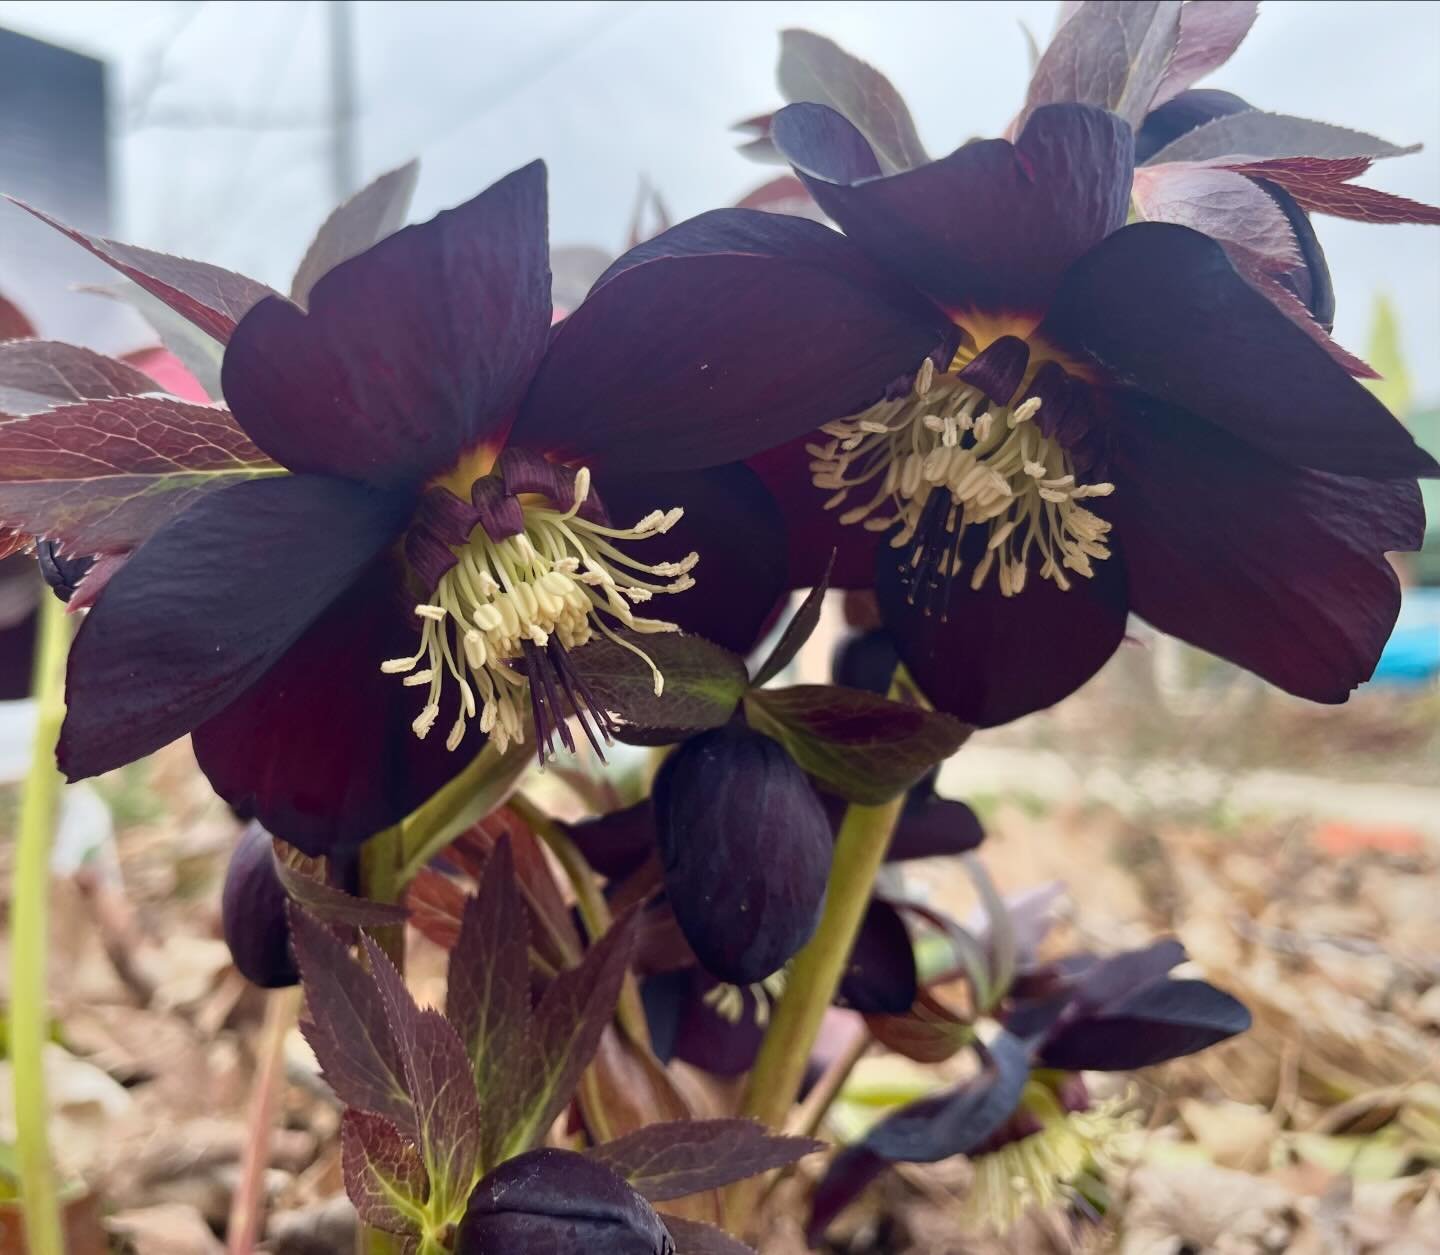 Lenten rose living up to its name. I wish they were a little bit taller so I could enjoy them without having to get down low to the ground, but I suppose they are a great show for the fae. #hellebore #flowerstagram #flowersmakemehappy #iwishtheywerea